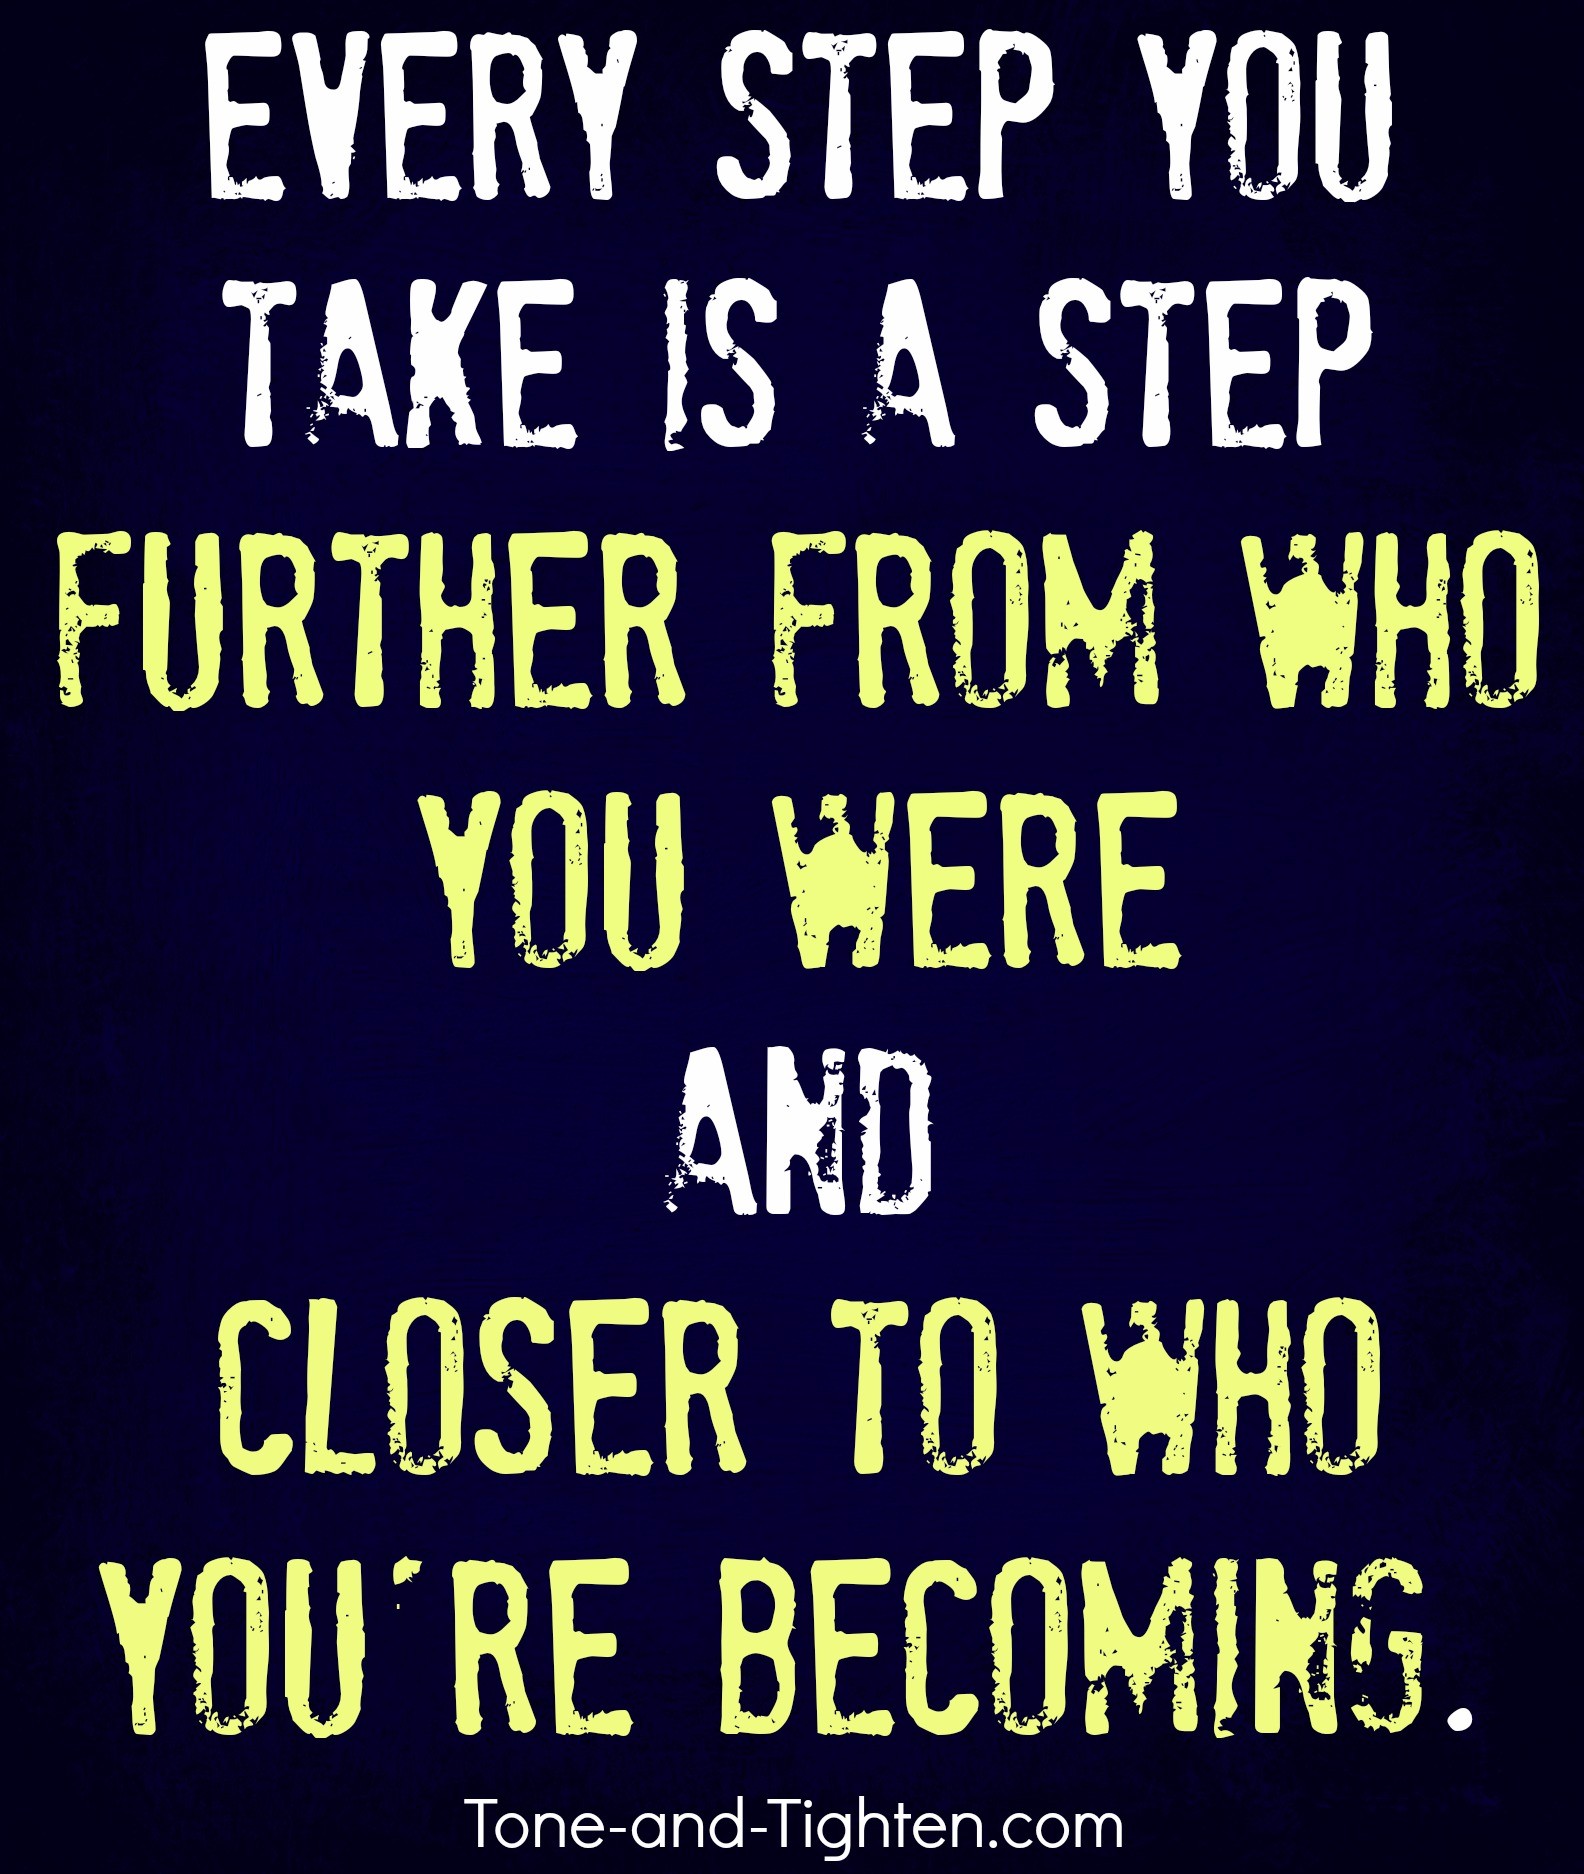 Every step you take is a step further from who you were and closer to who you are becoming